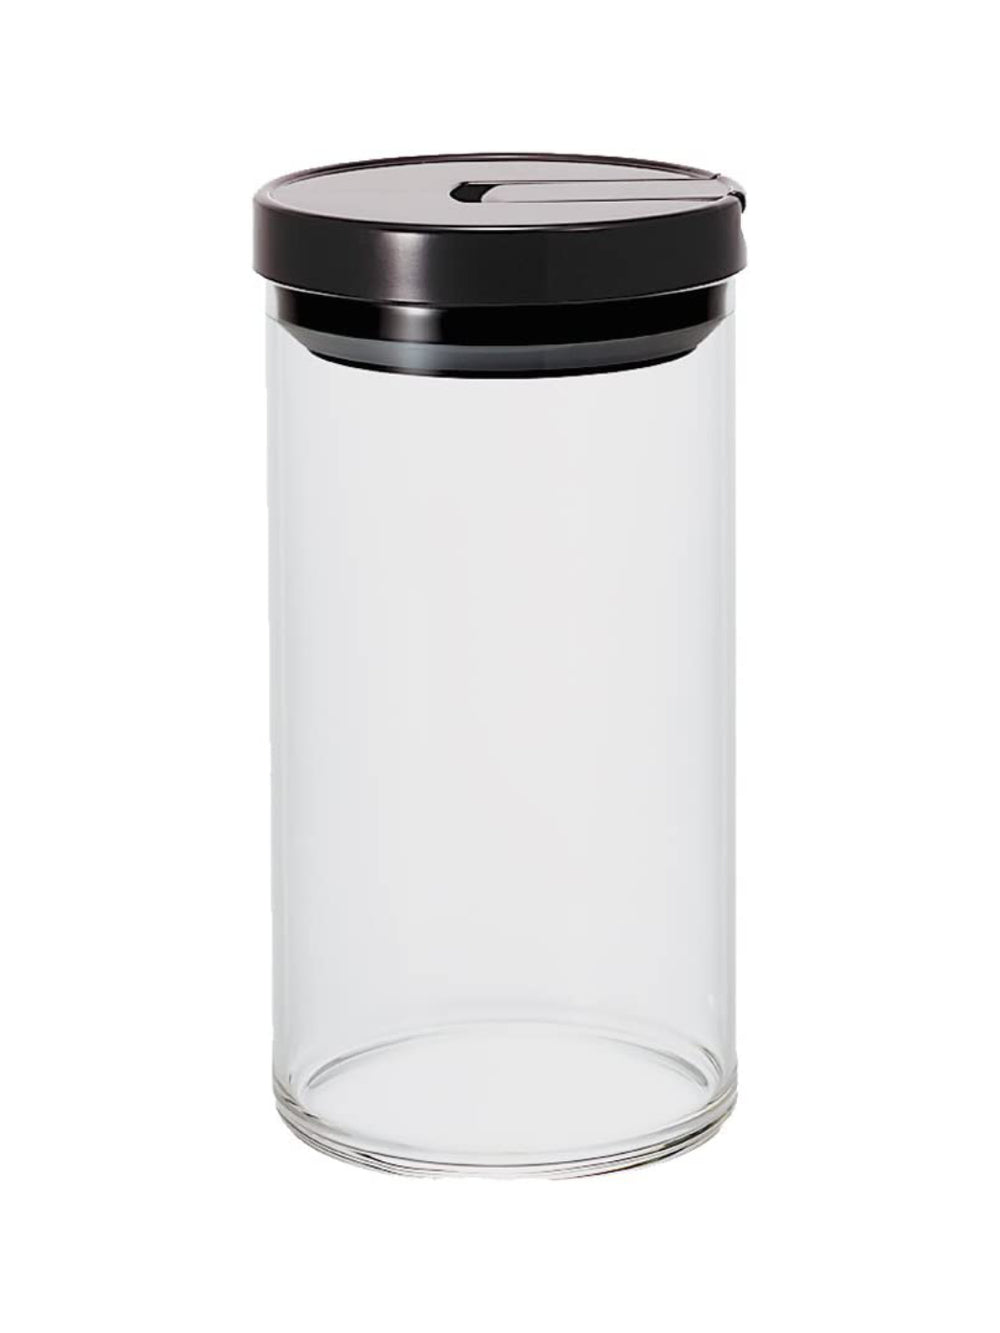 https://cdn.shopify.com/s/files/1/2404/0687/products/hario_mcn-300b-glass-coffee-canister_1000ml.jpg?v=1678120314&width=1000